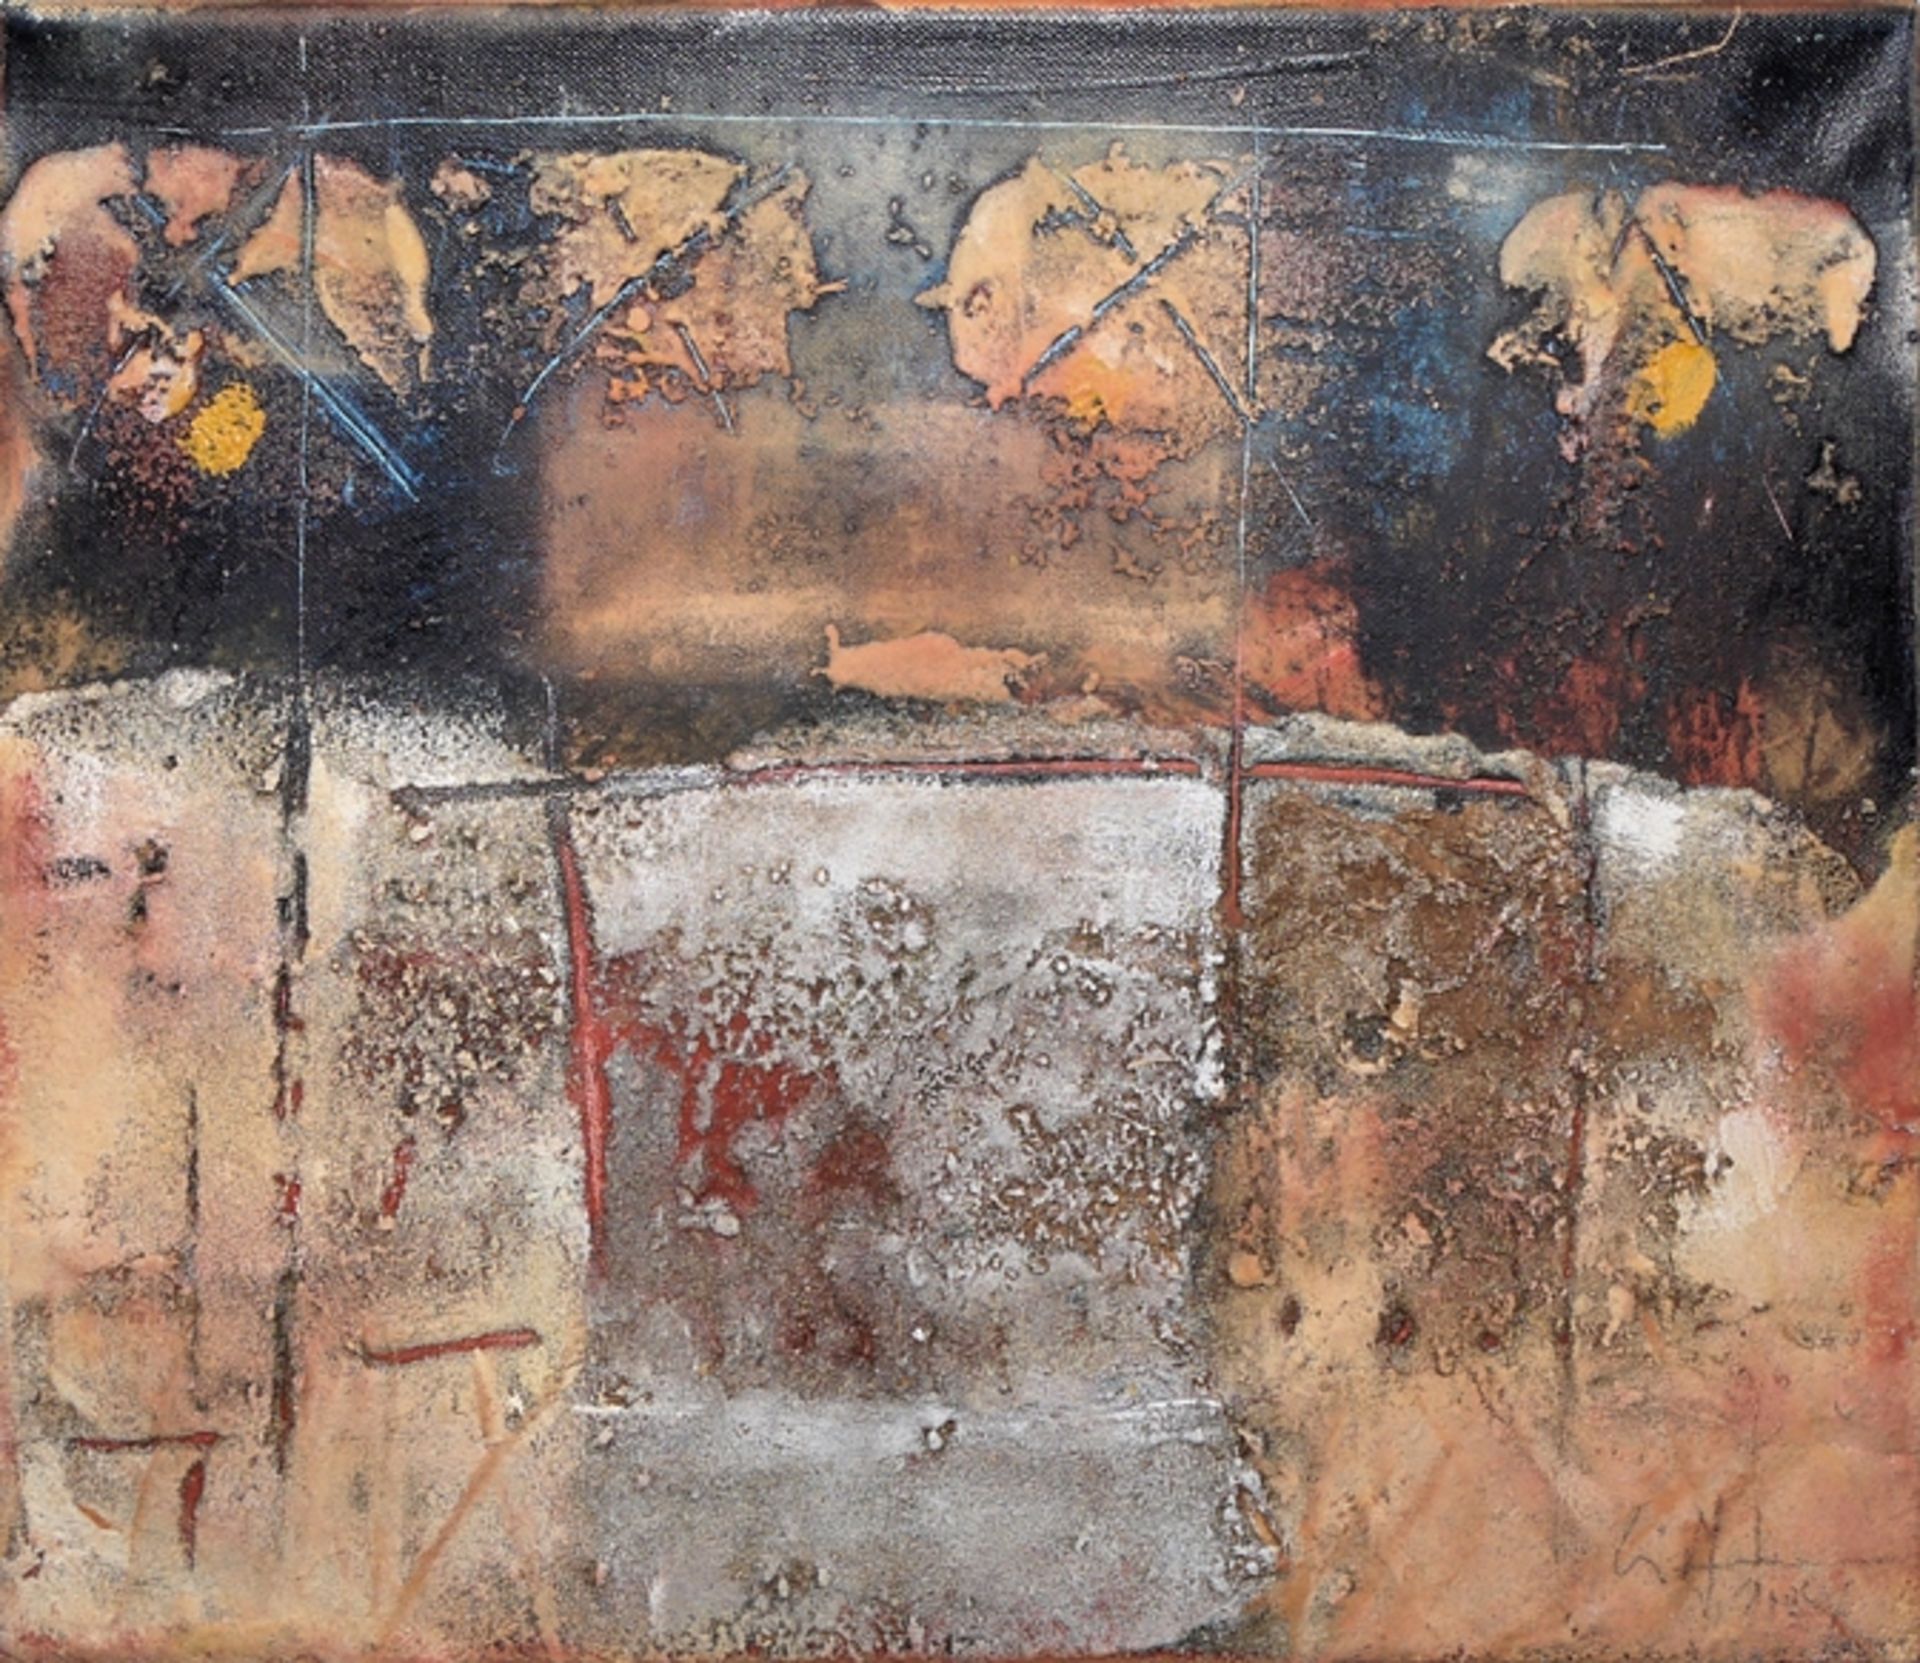 Klaus Neuper, gallery estate with 6 mixed media & artist's catalogue - Image 3 of 8